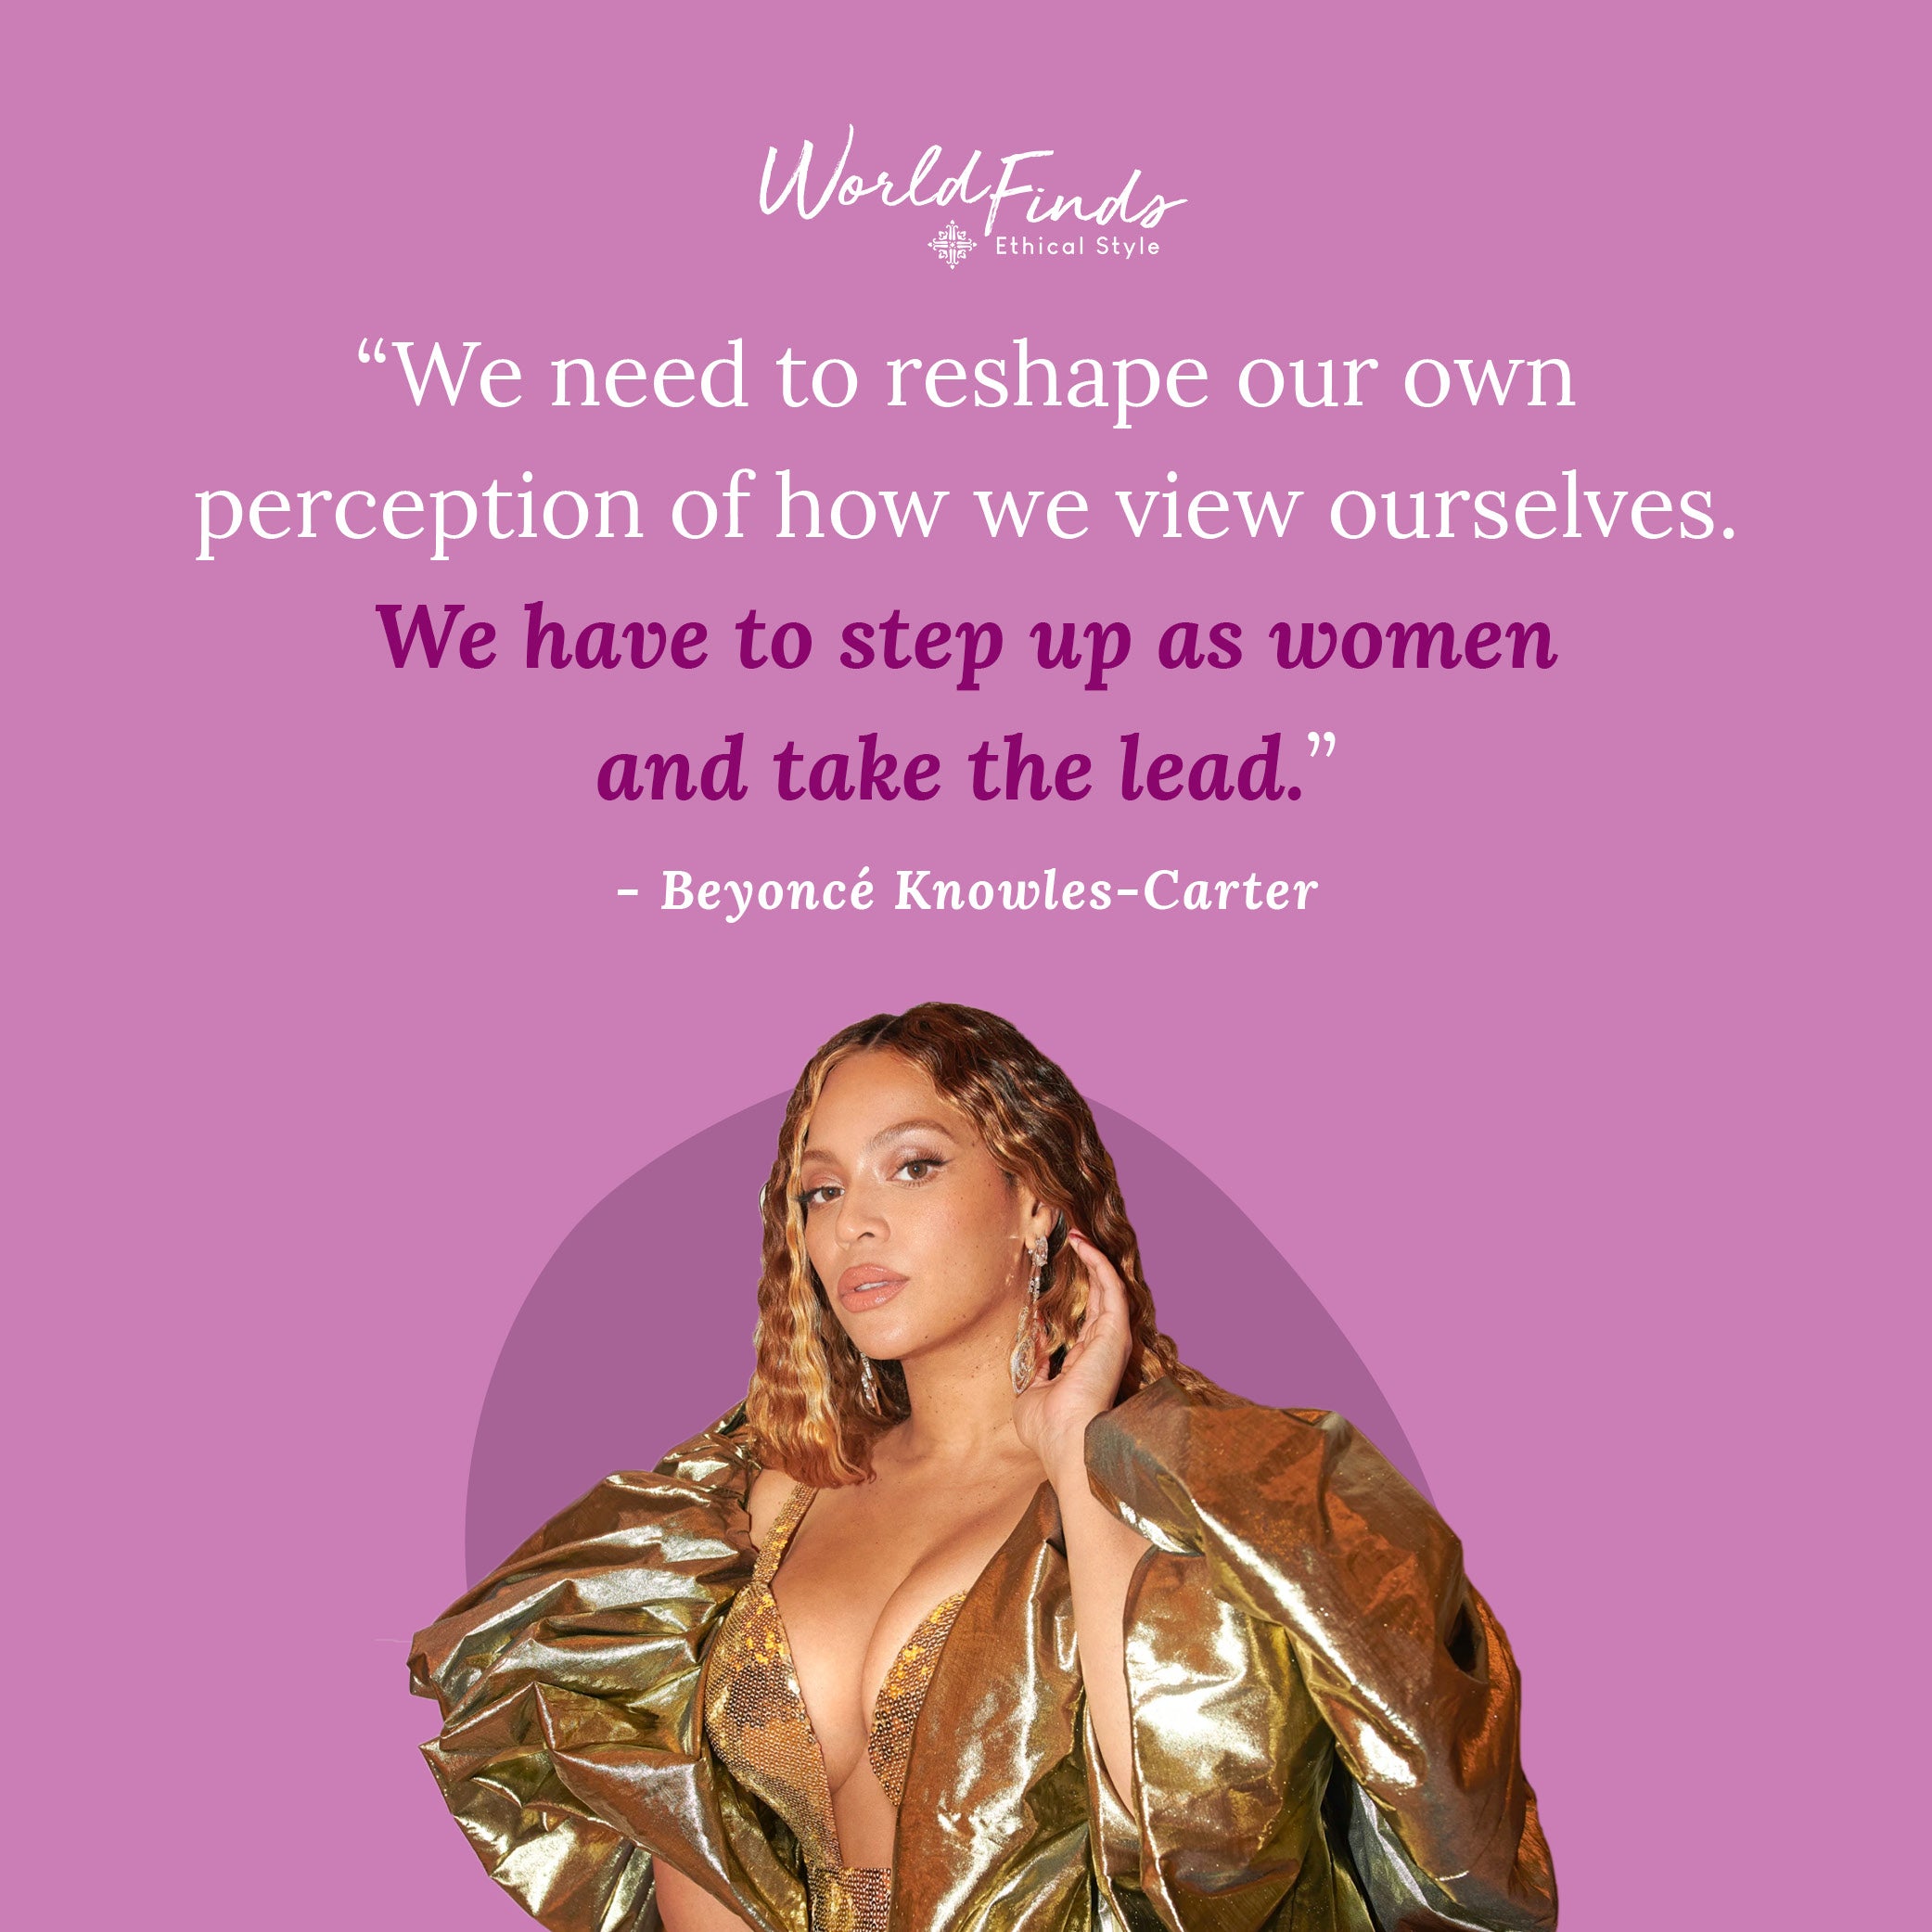 Quote from Beyonce, "We need to reshape our own perception of how we view ourselves. We have to step up as women and take the lead."